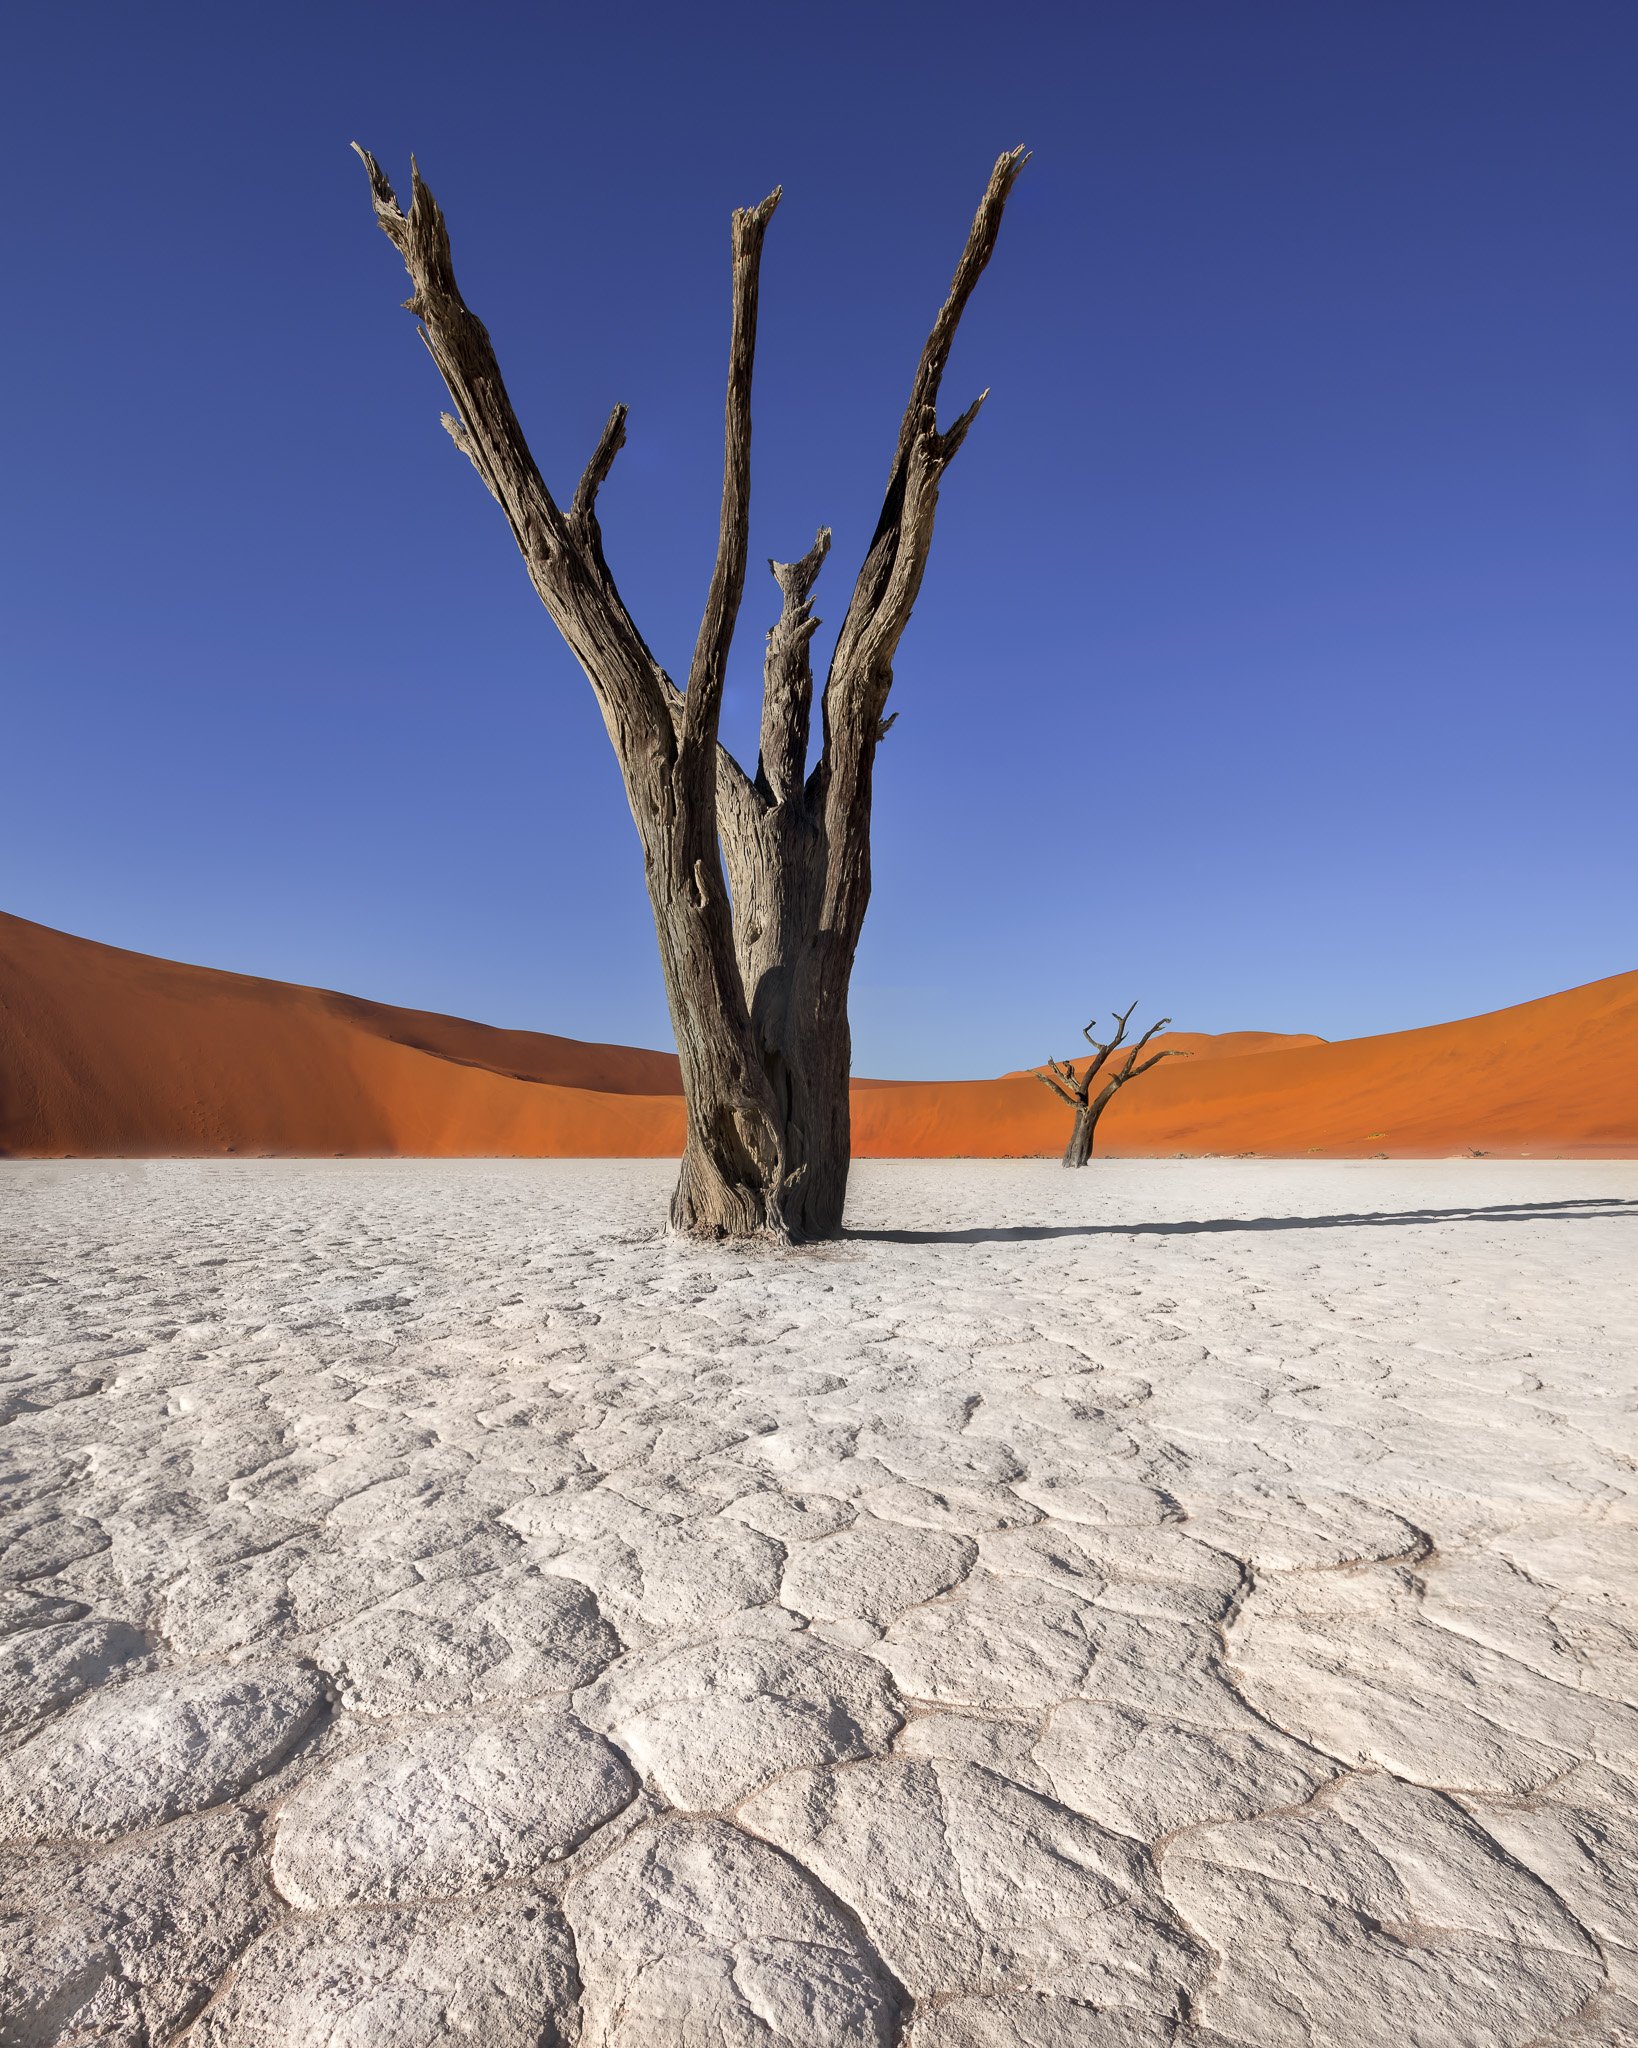 acacia, Africa, african, arid, beautiful, blue, branch, camelthorn, clay, day, daylight, dead, deadvlei, desert, drought, dry, dune, famous, forest, hot, lake, landmark, landscape, morning, namib, namibia, namibian, national, nature, naukluft, orange, out, Andrey Omelyanchuk